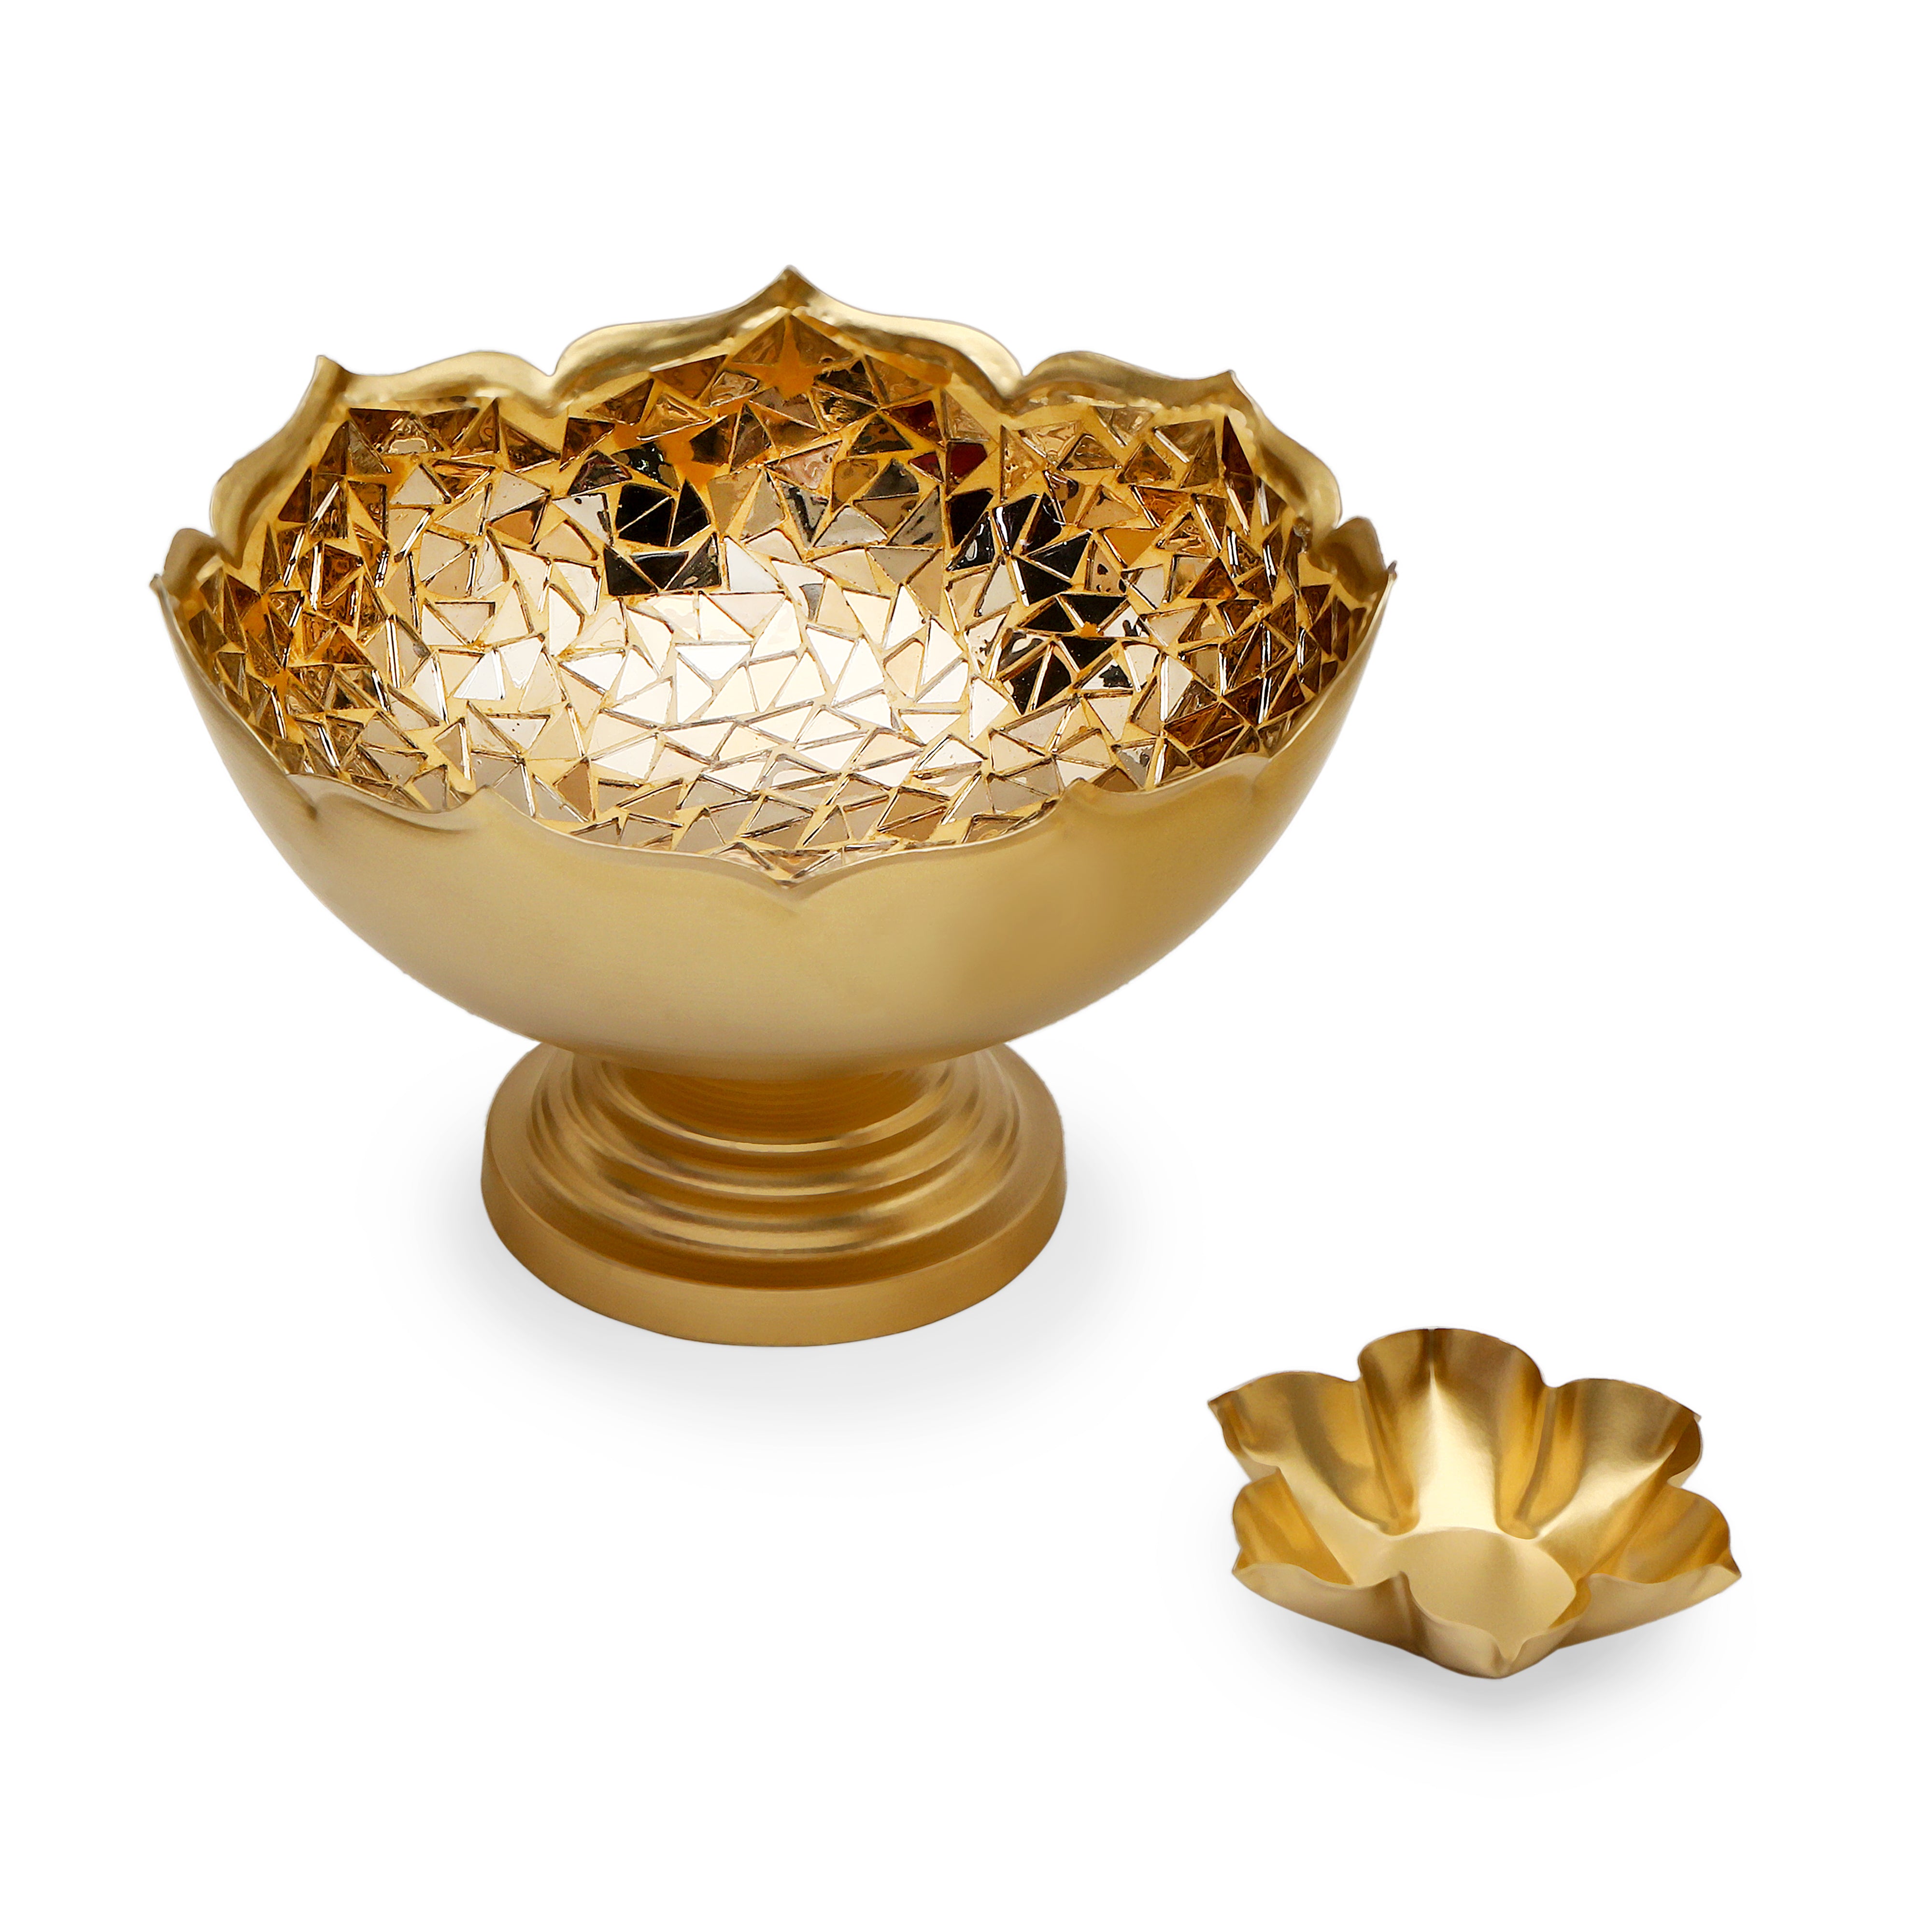 Gold Mosaic Urli with Stand 8.5" Inch (Small) - The Home Co.